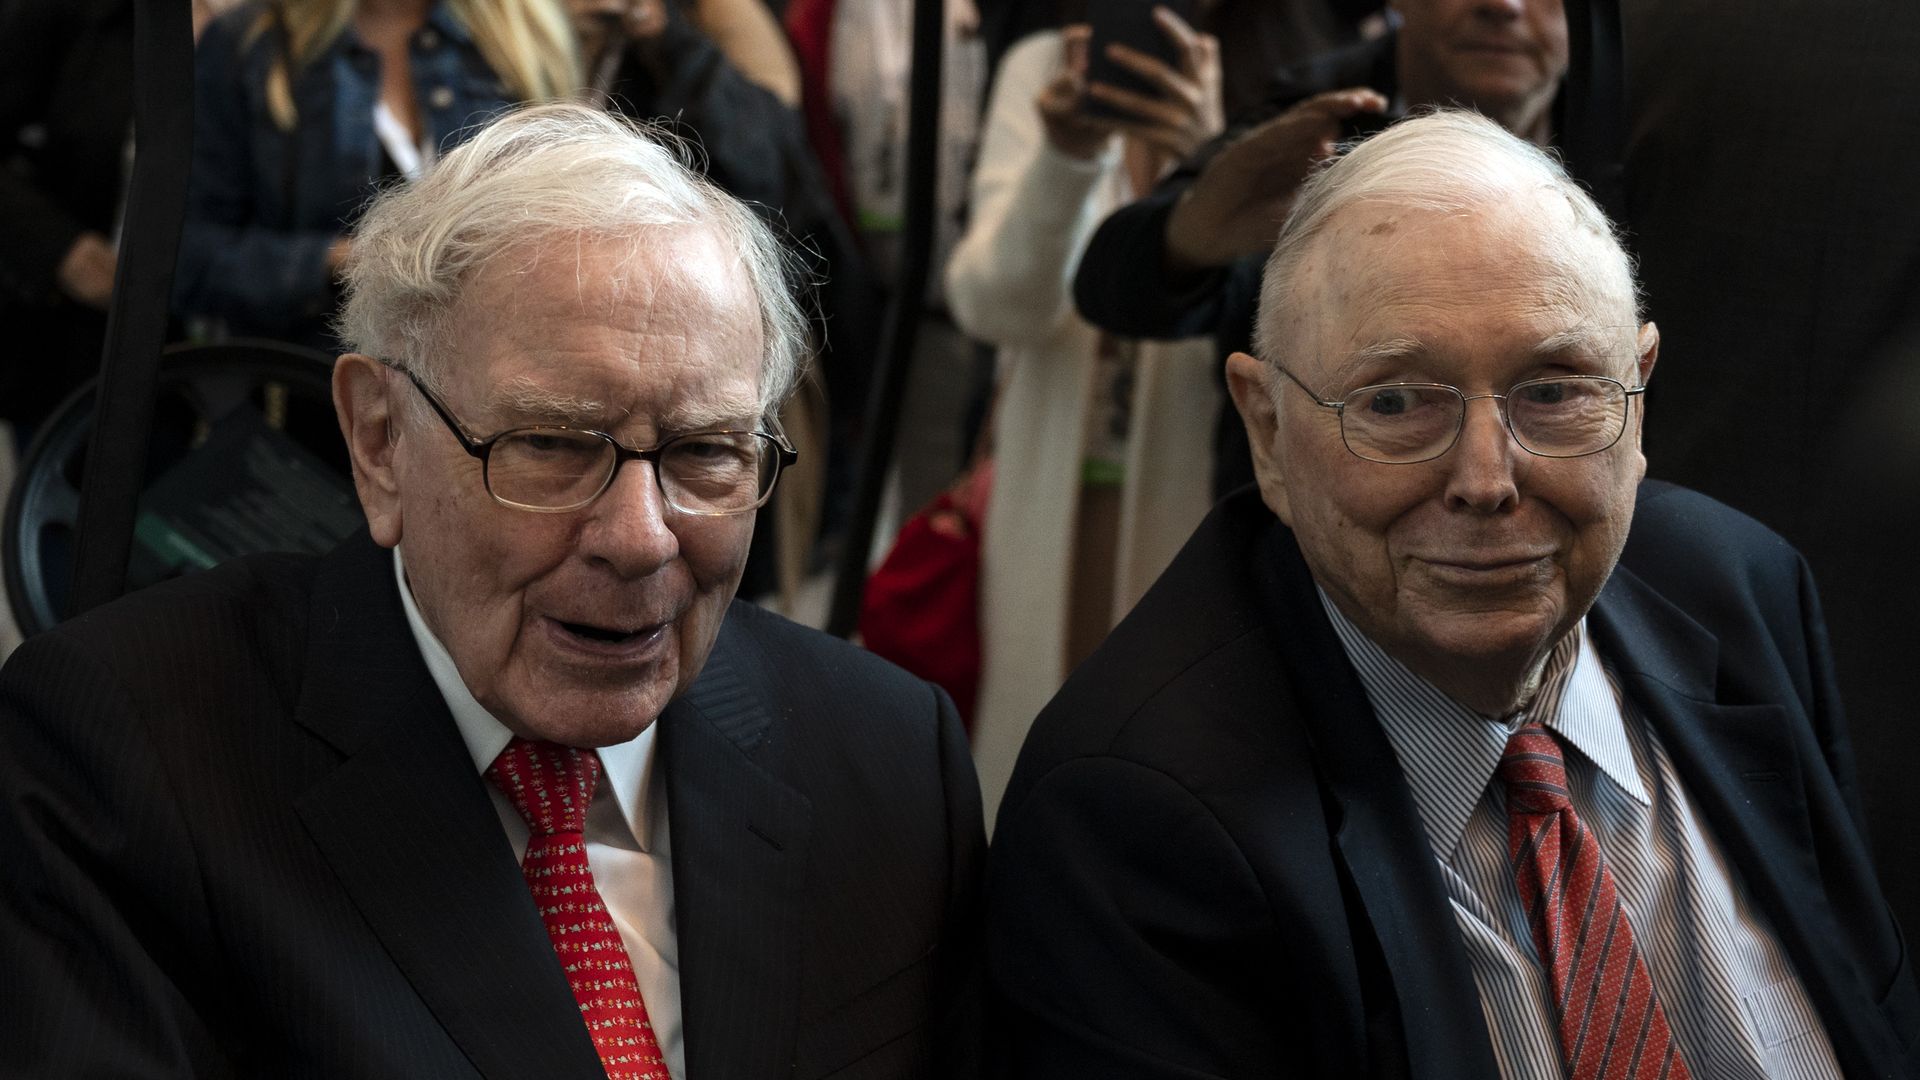 Warren Buffett (L), CEO of Berkshire Hathaway, and vice chairman Charlie Munger attend the 2019 annual shareholders meeting in Omaha, Nebraska, May 3, 2019.